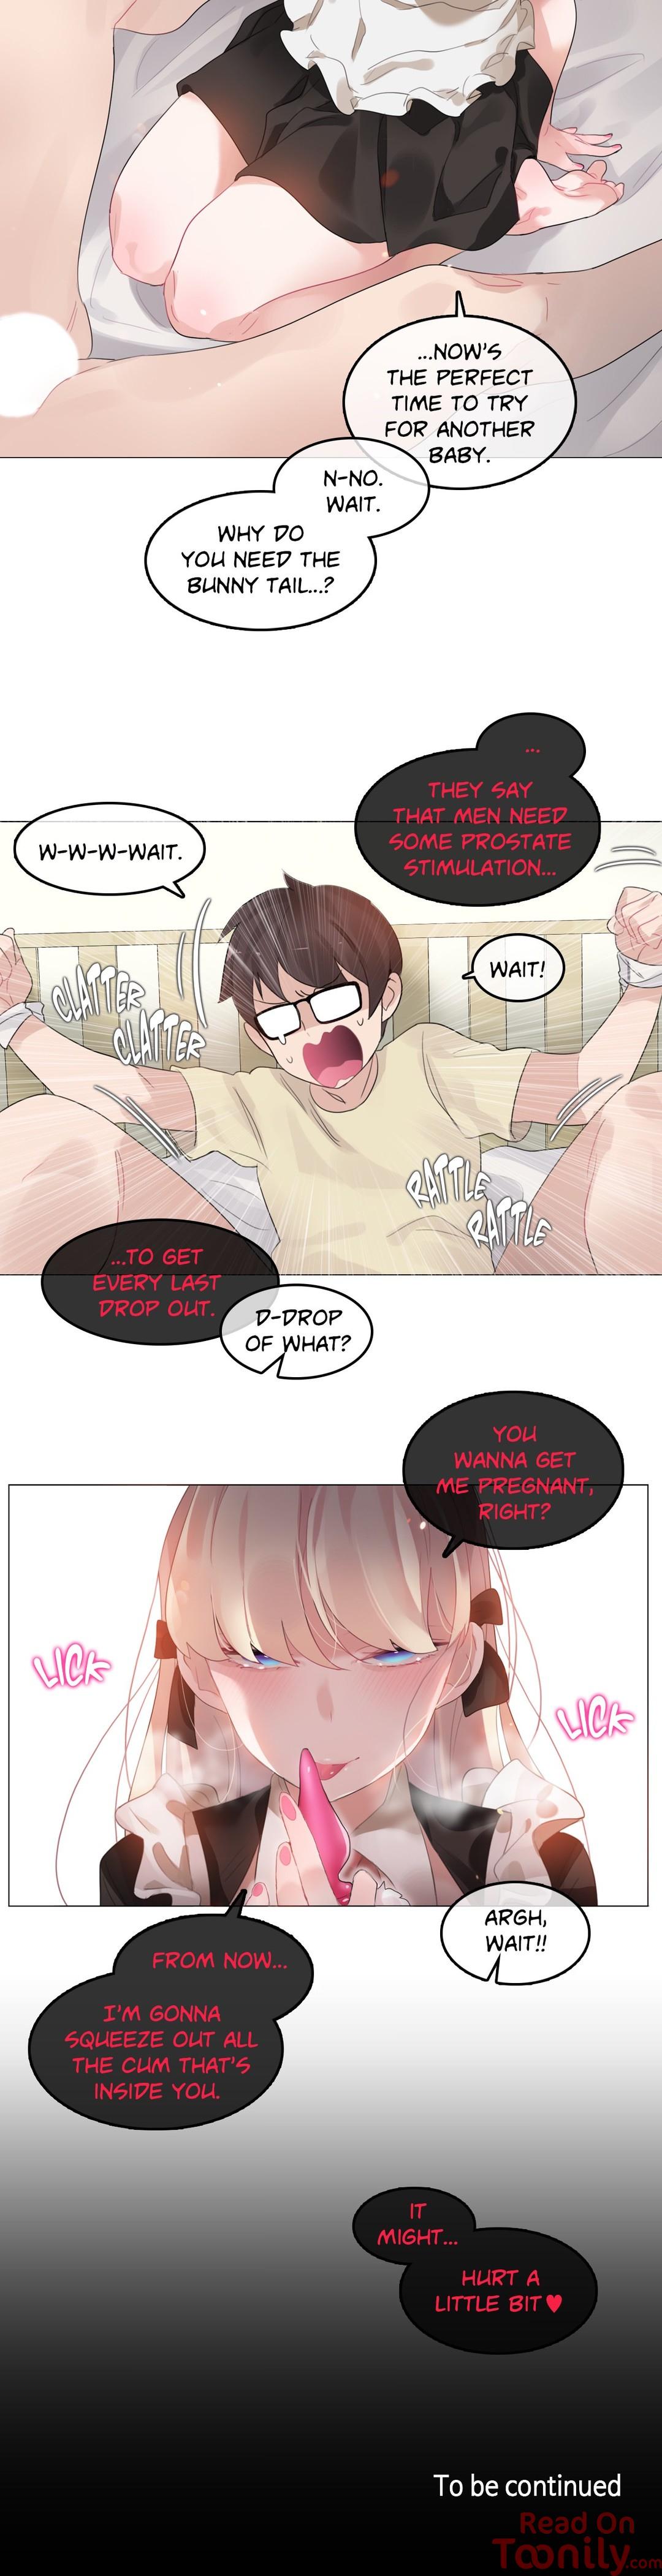 A Pervert's Daily Life • Chapter 66-70 89